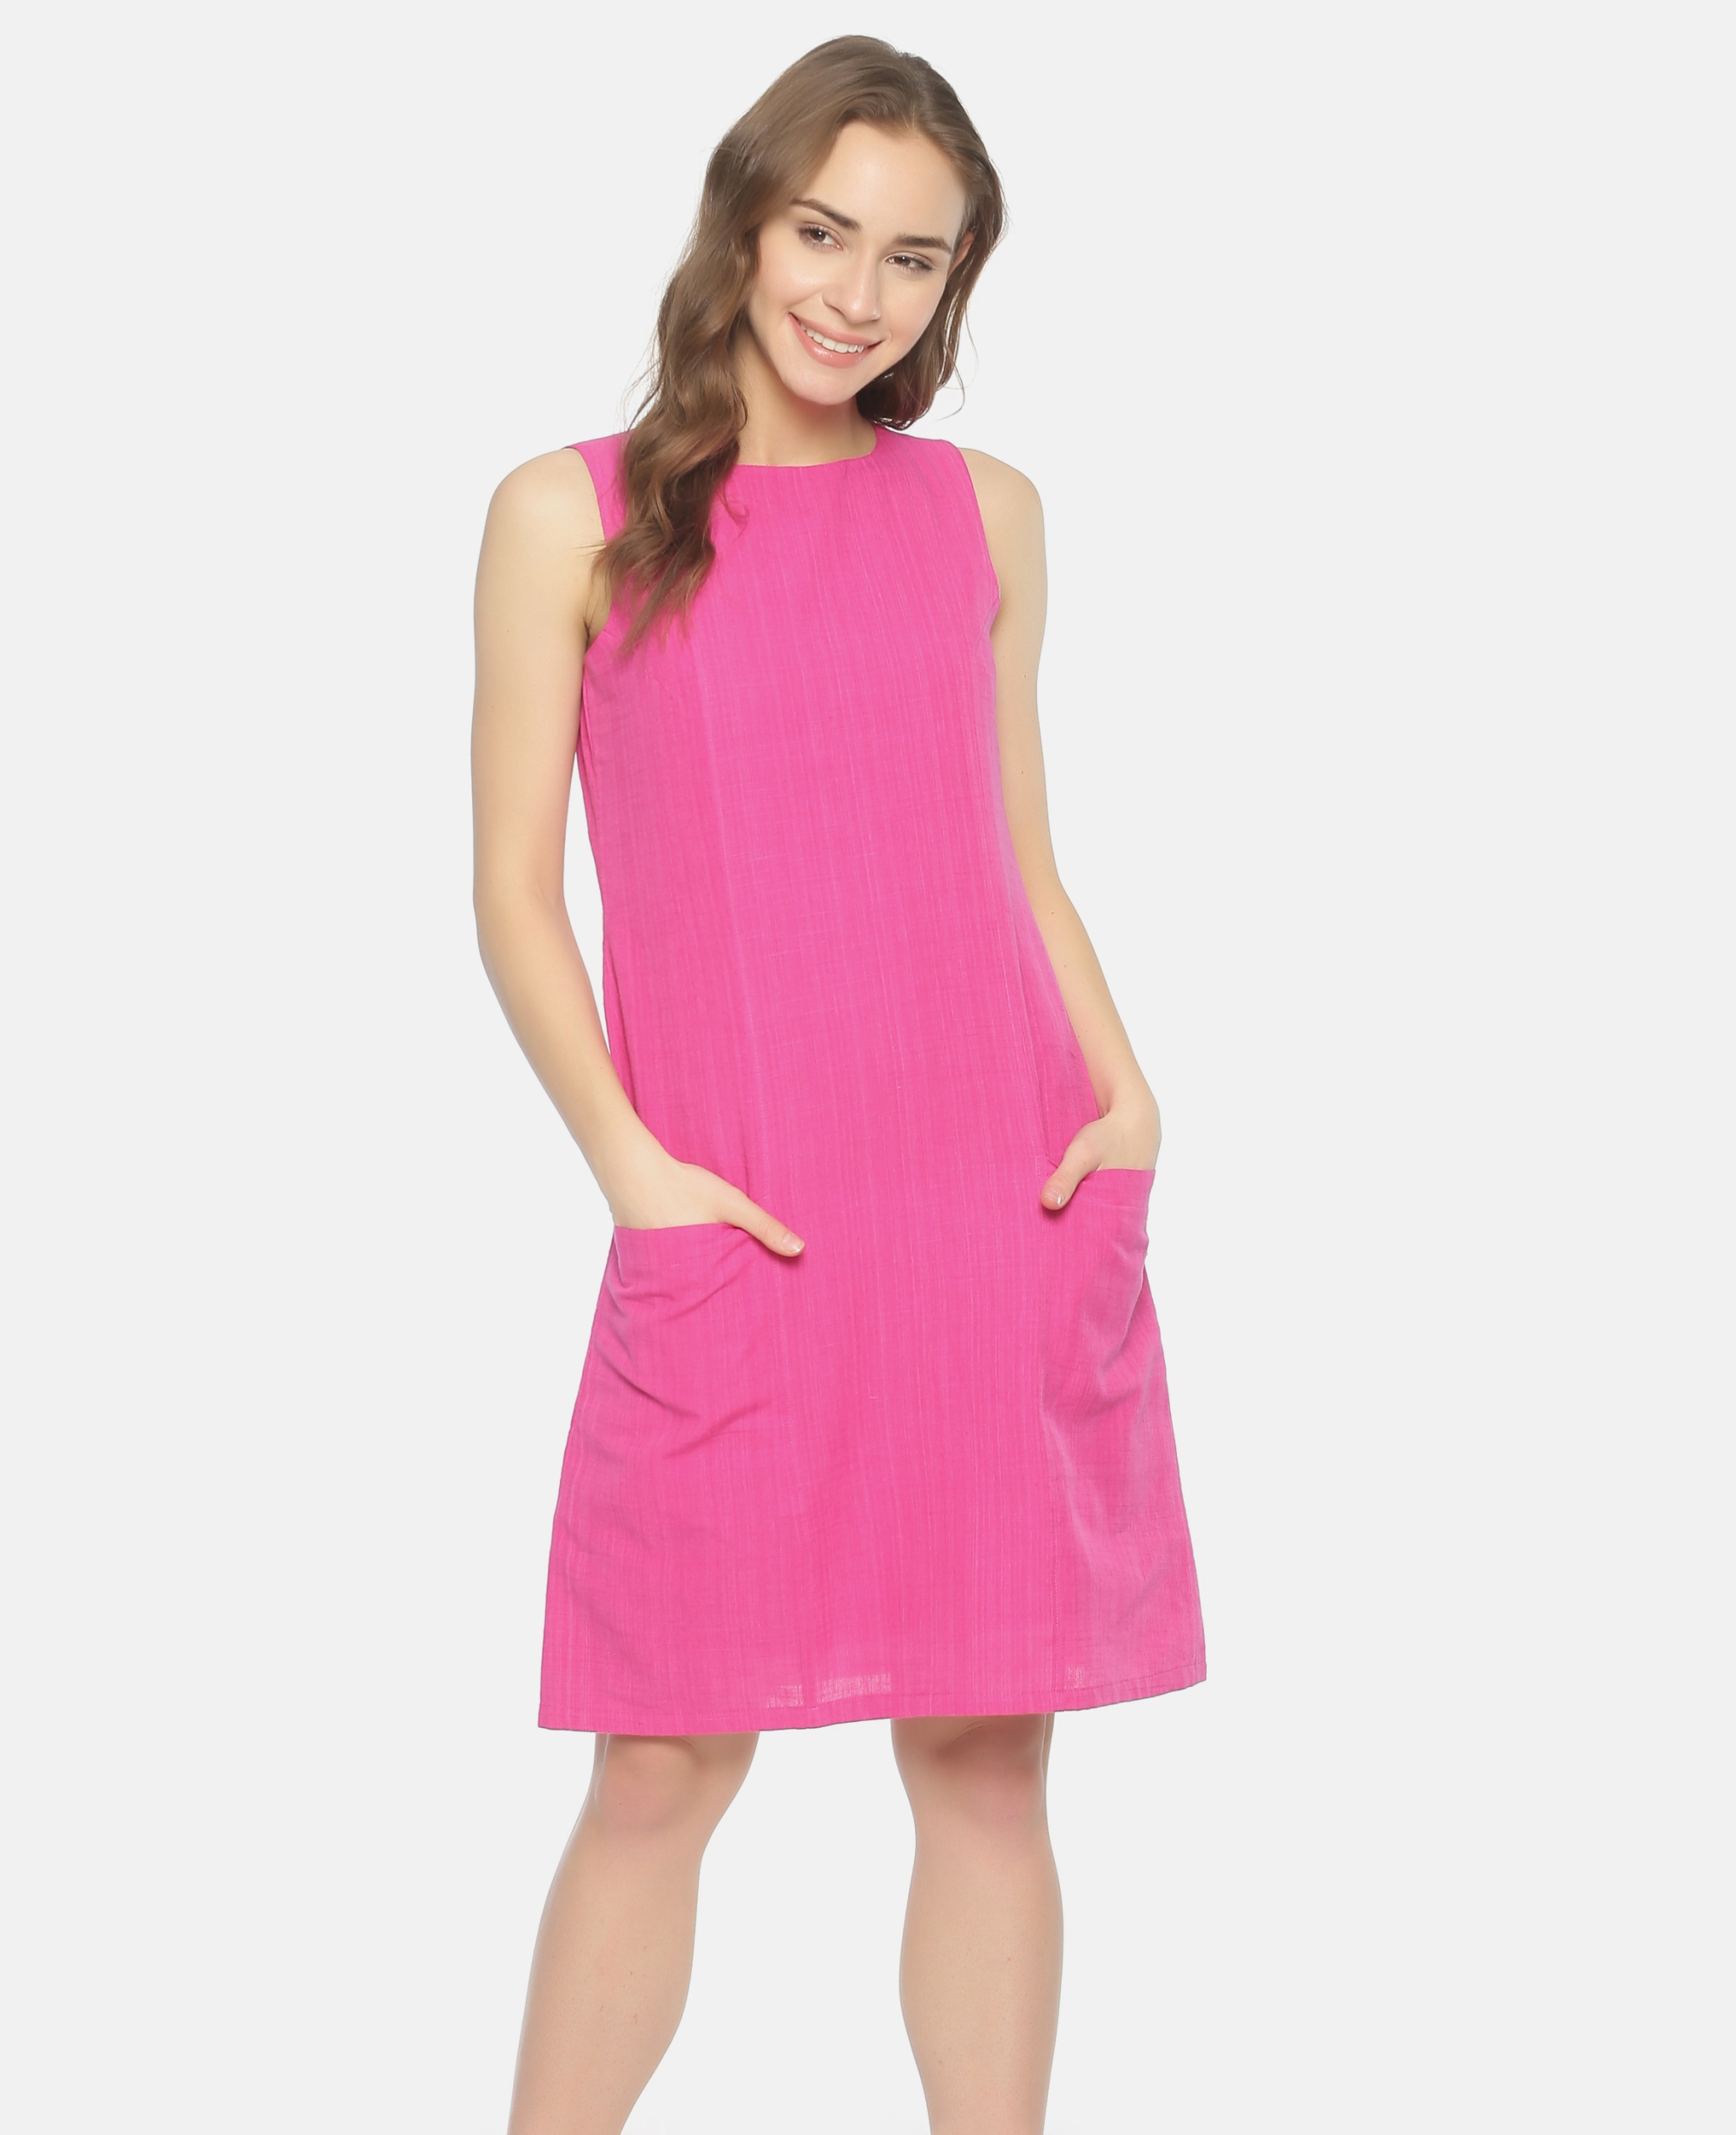 Pink shift dress with pockets by Label ...